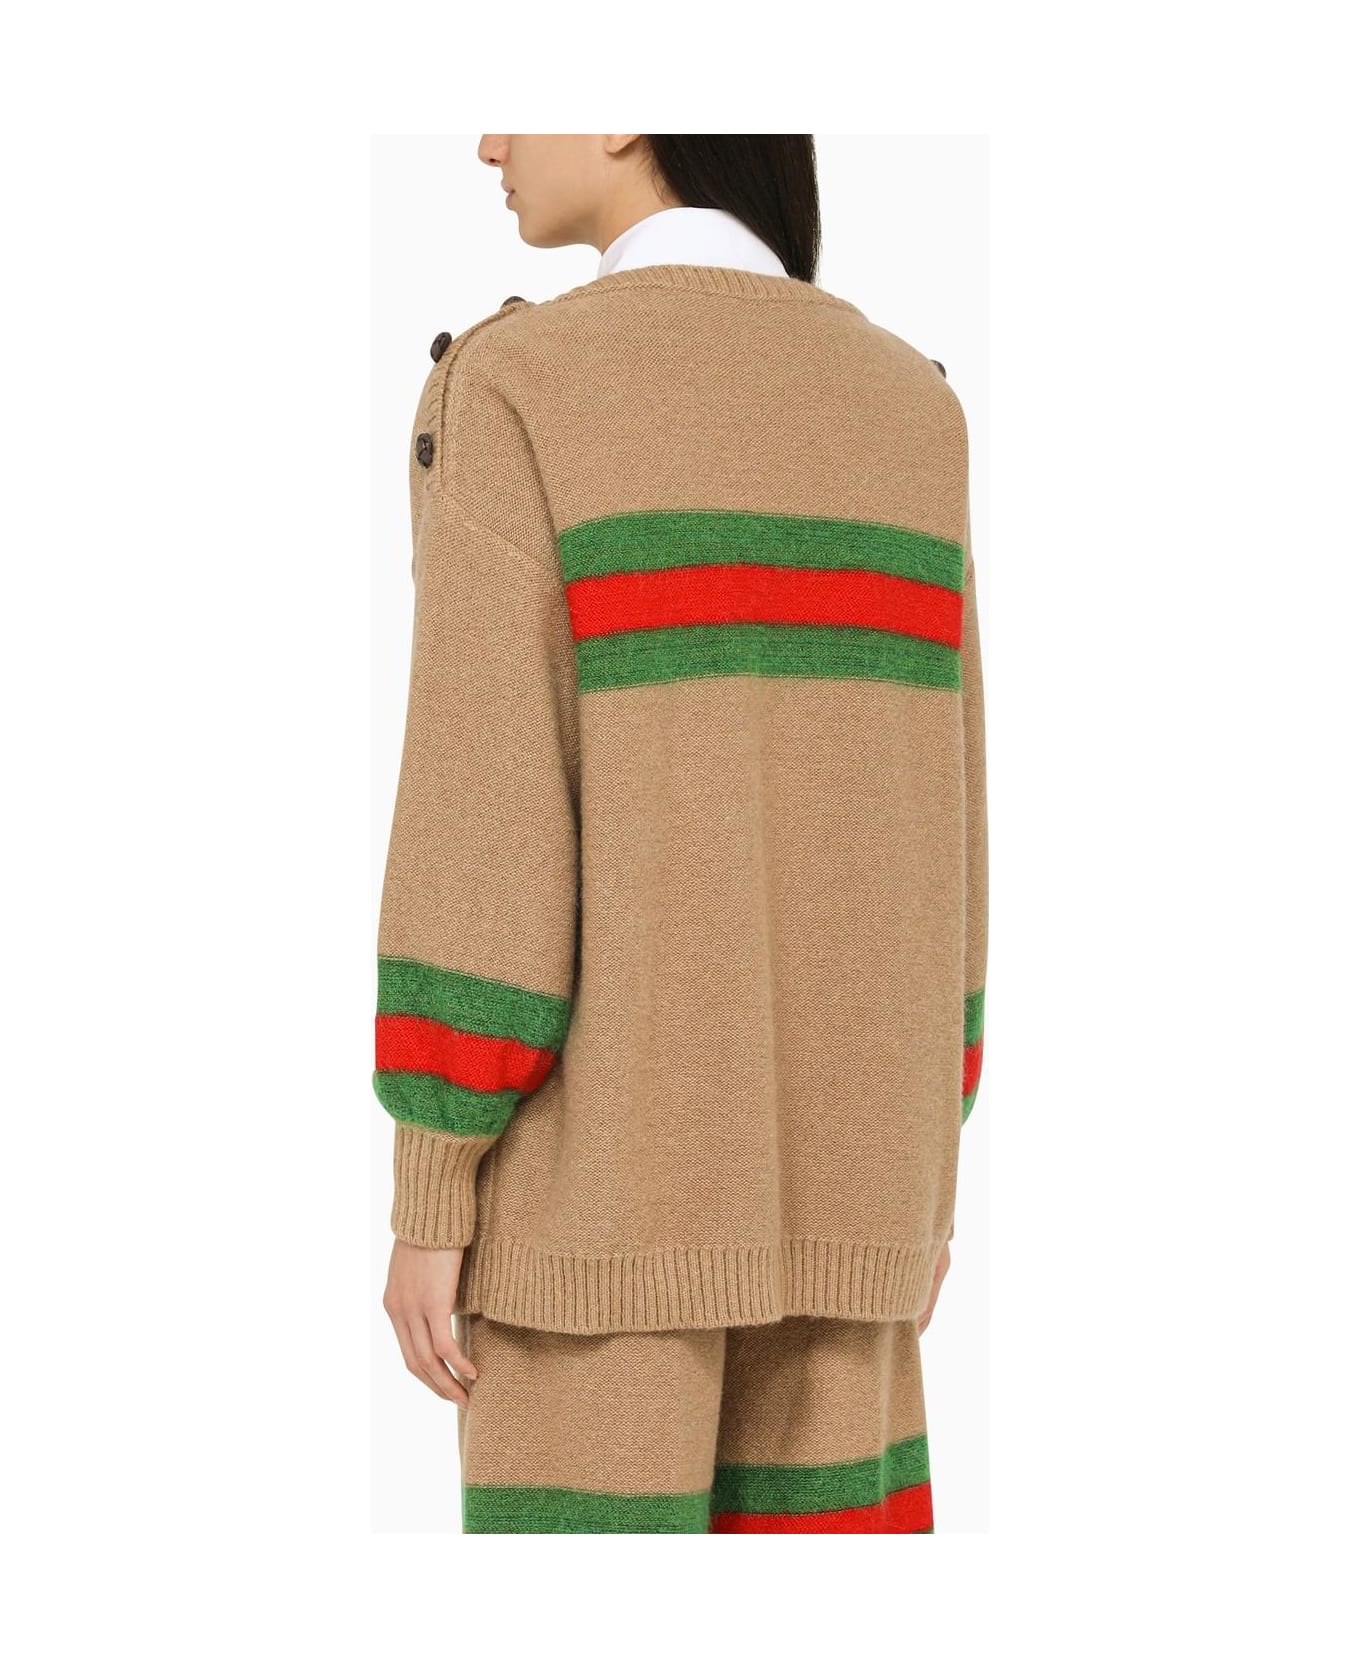 Gucci Camel Wool Crew-neck Sweater - Camel